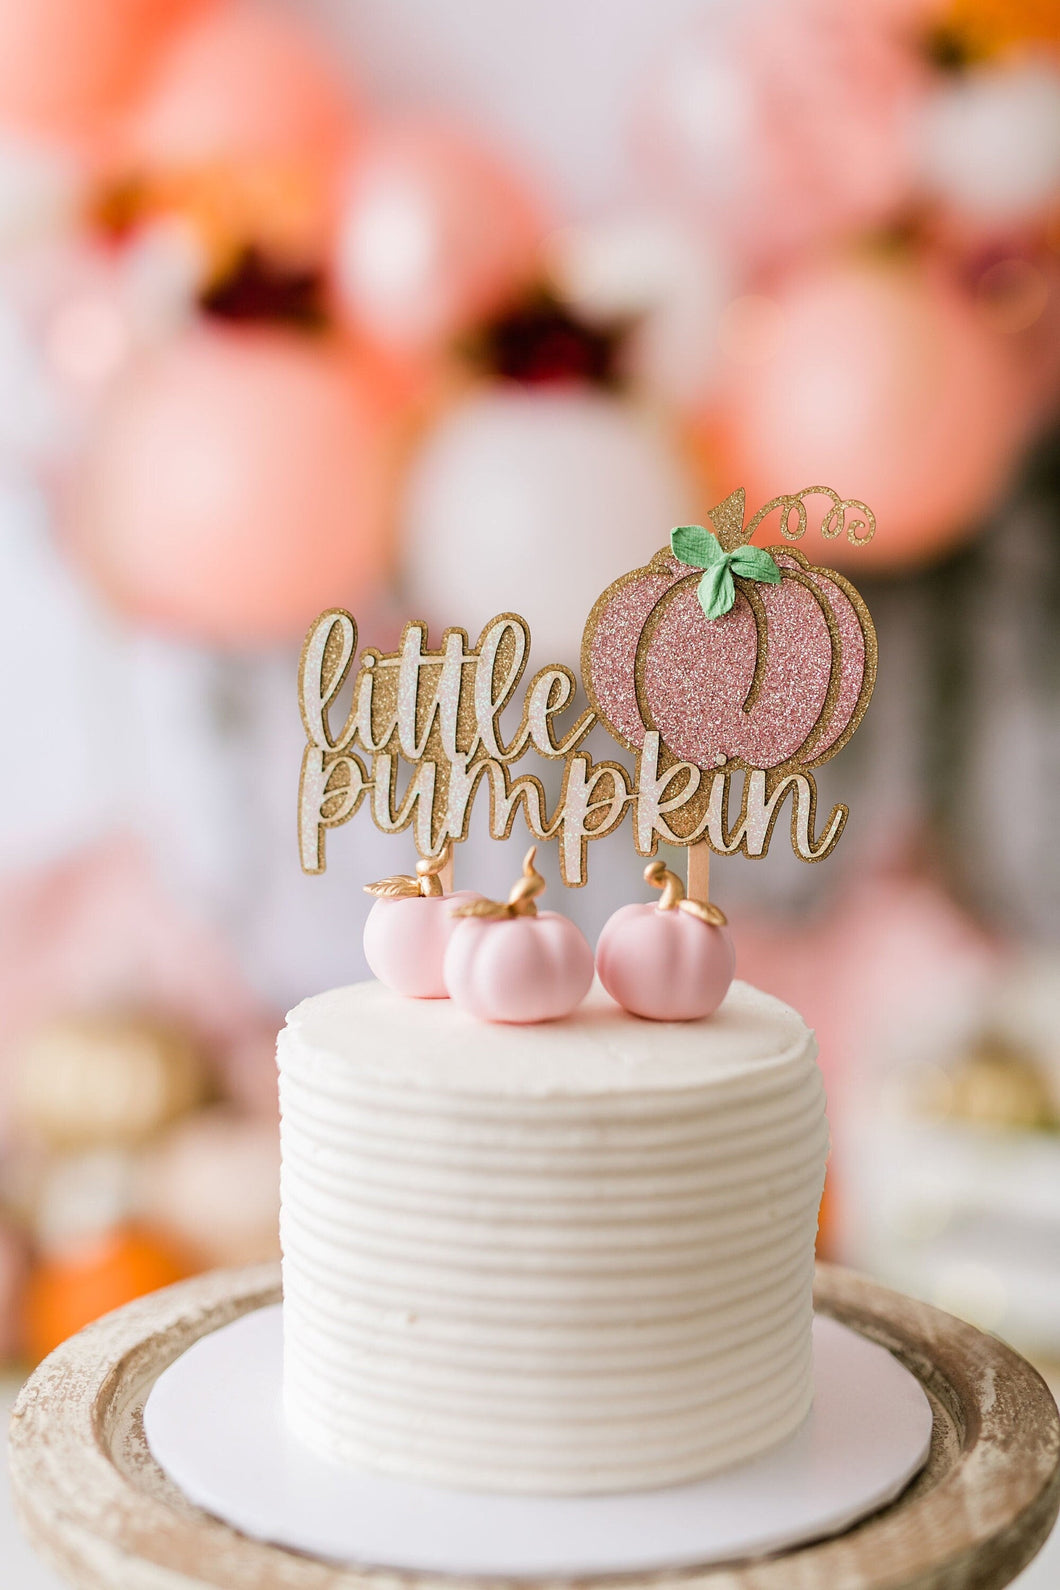 Our Little Pumpkin Cake Topper - Pumpkin Baby Shower - Pumpkin Theme Birthday - Glitter Cake Topper - Gold Rose Gold Coral Pink Cake Topper